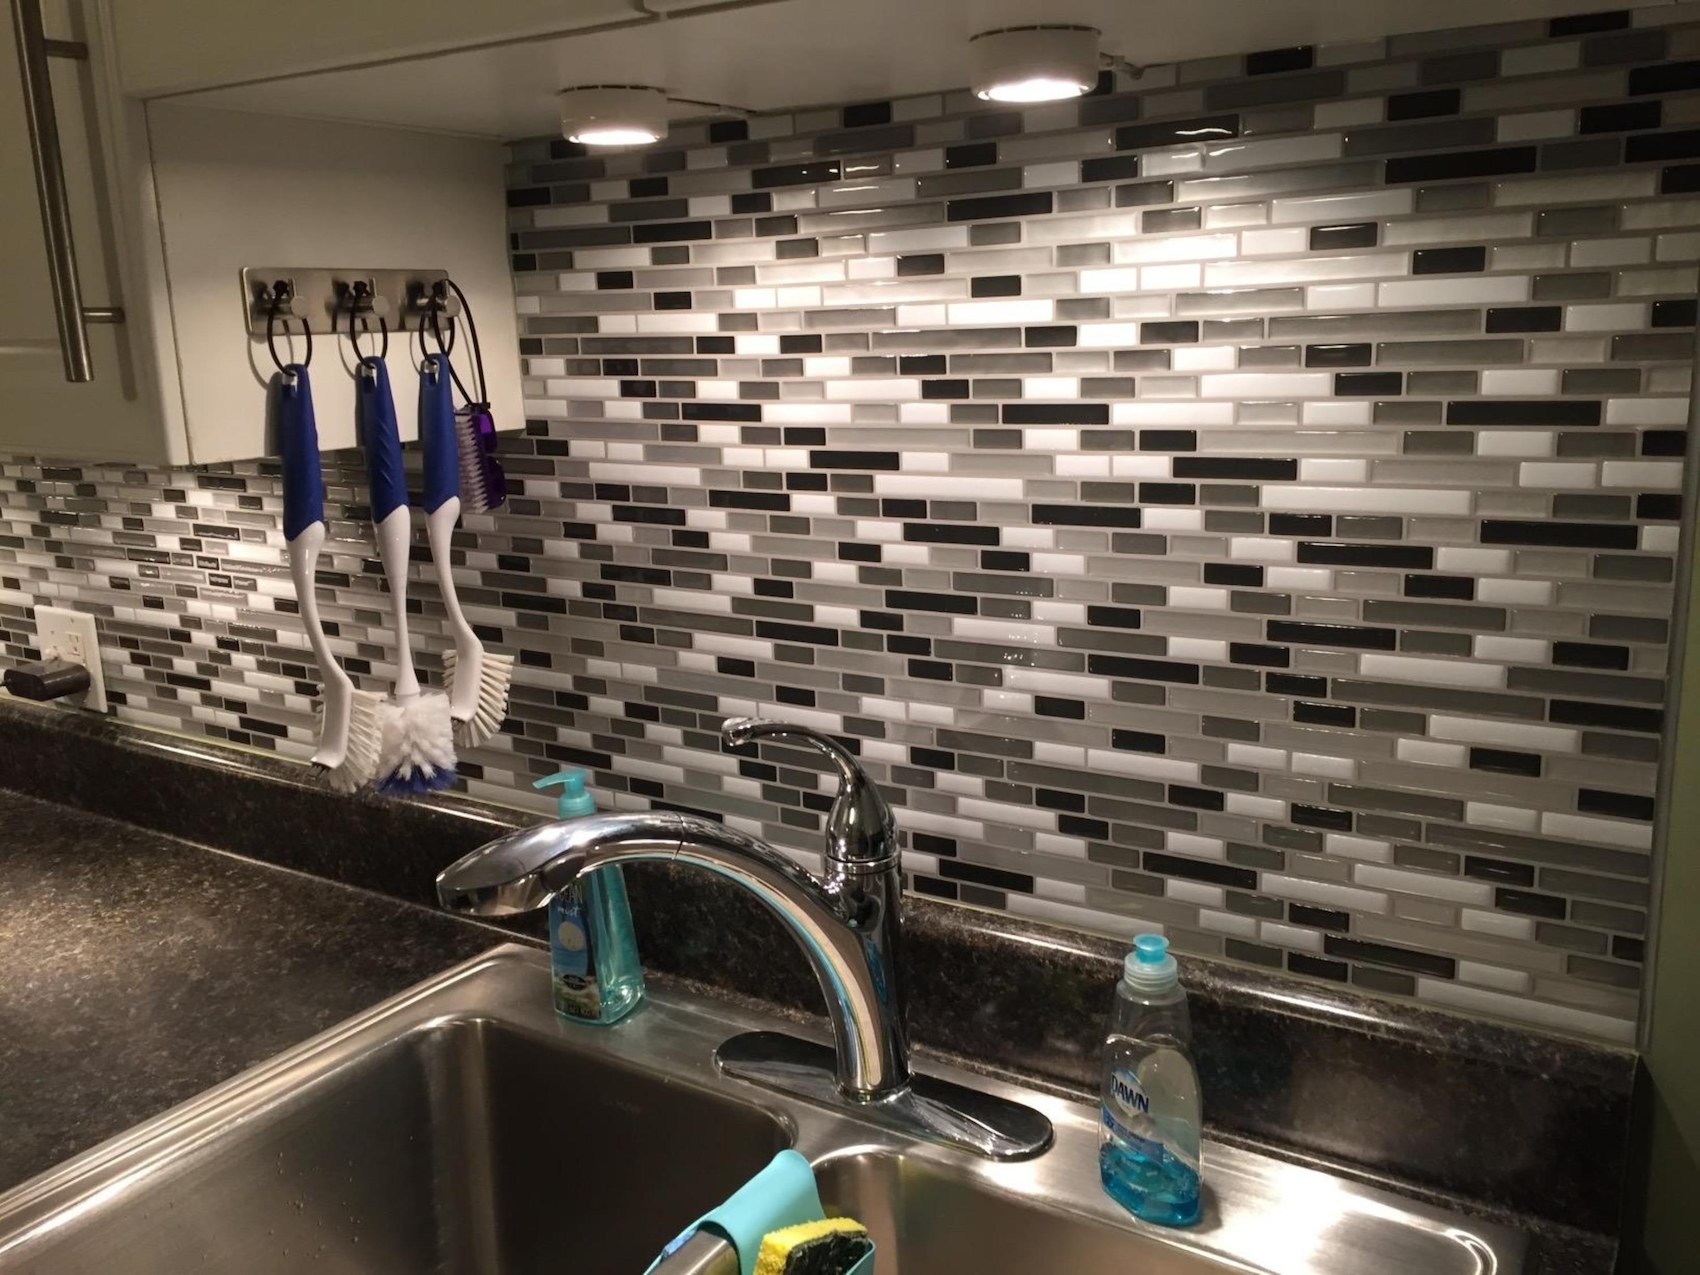 The backsplash with various white, gray, and black rectangles shown on a kitchen wall